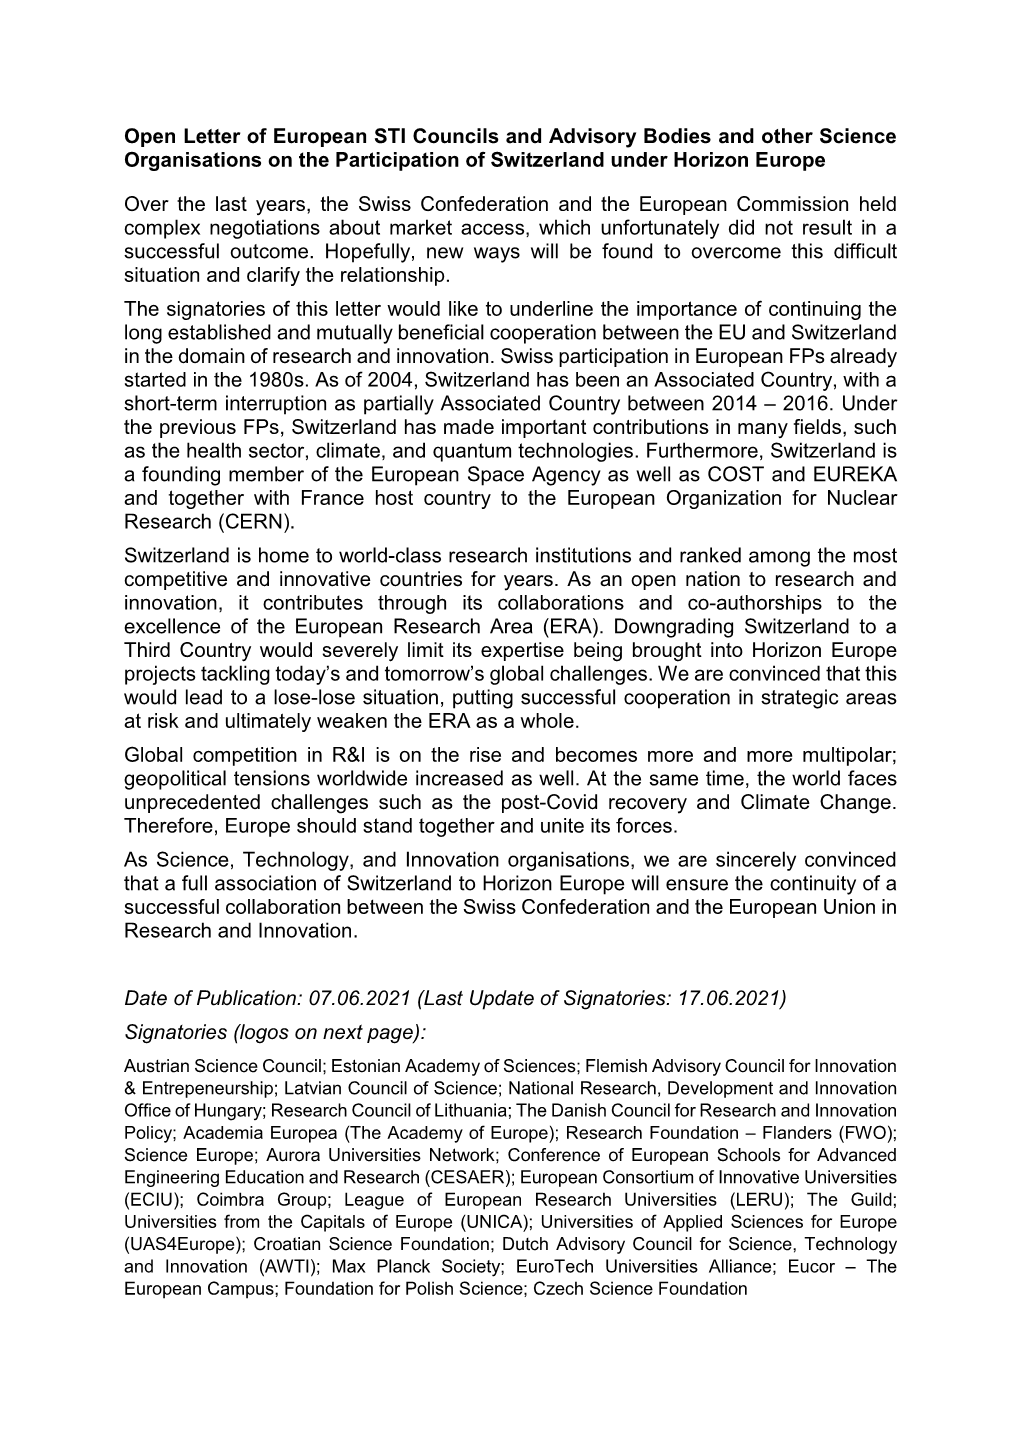 Open Letter on the Participation of Switzerland